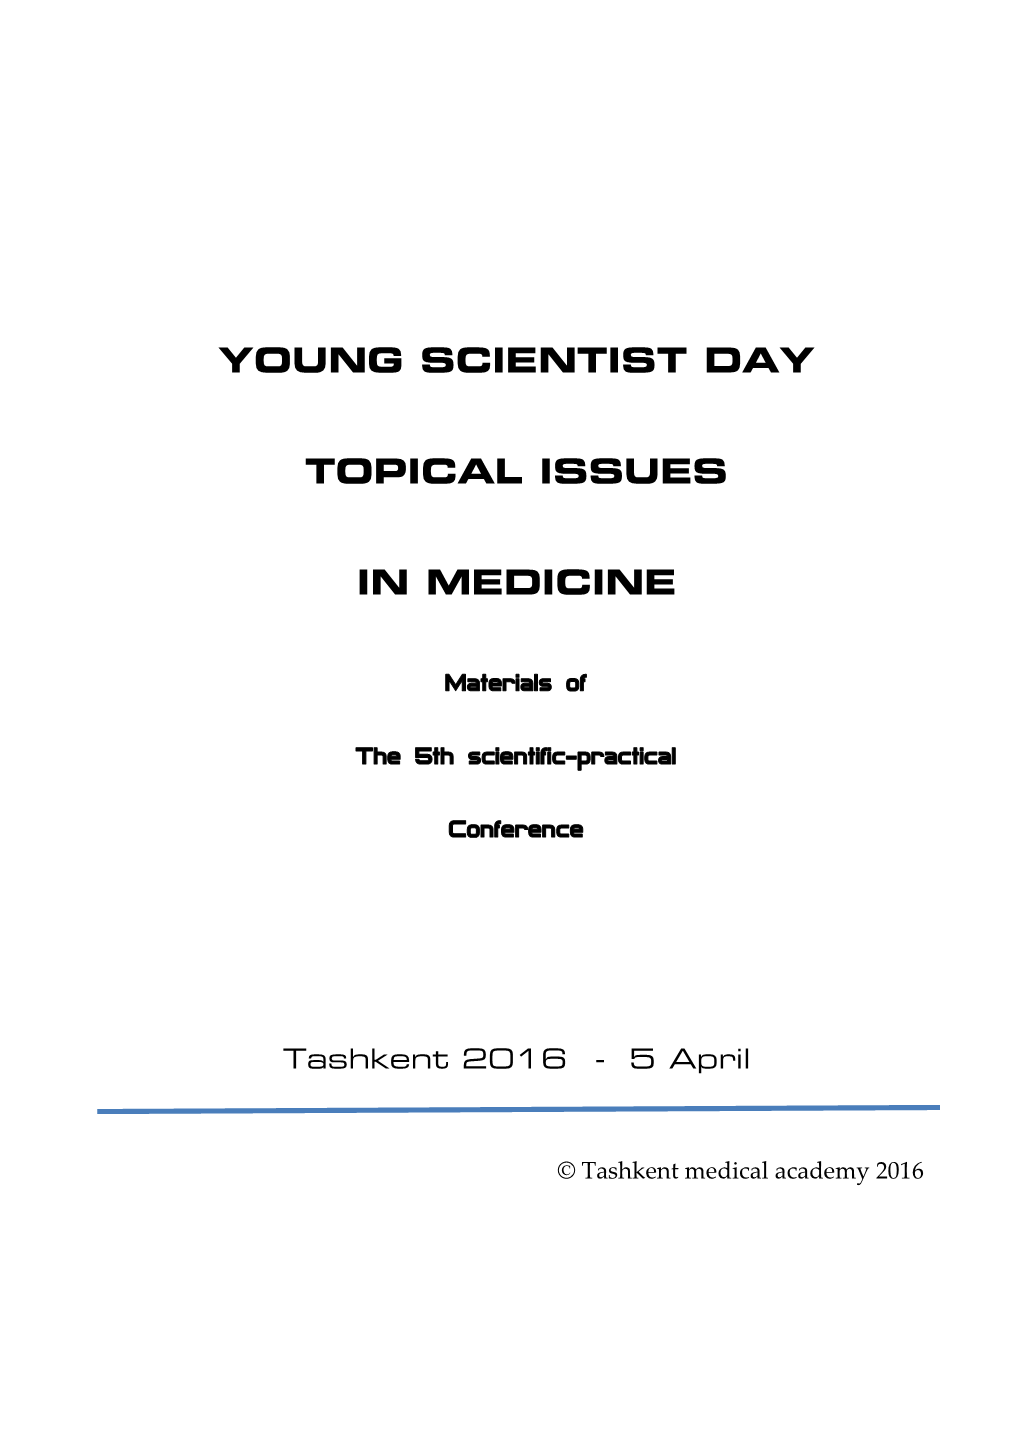 Young Scientist Day Topical Issues in Medicine